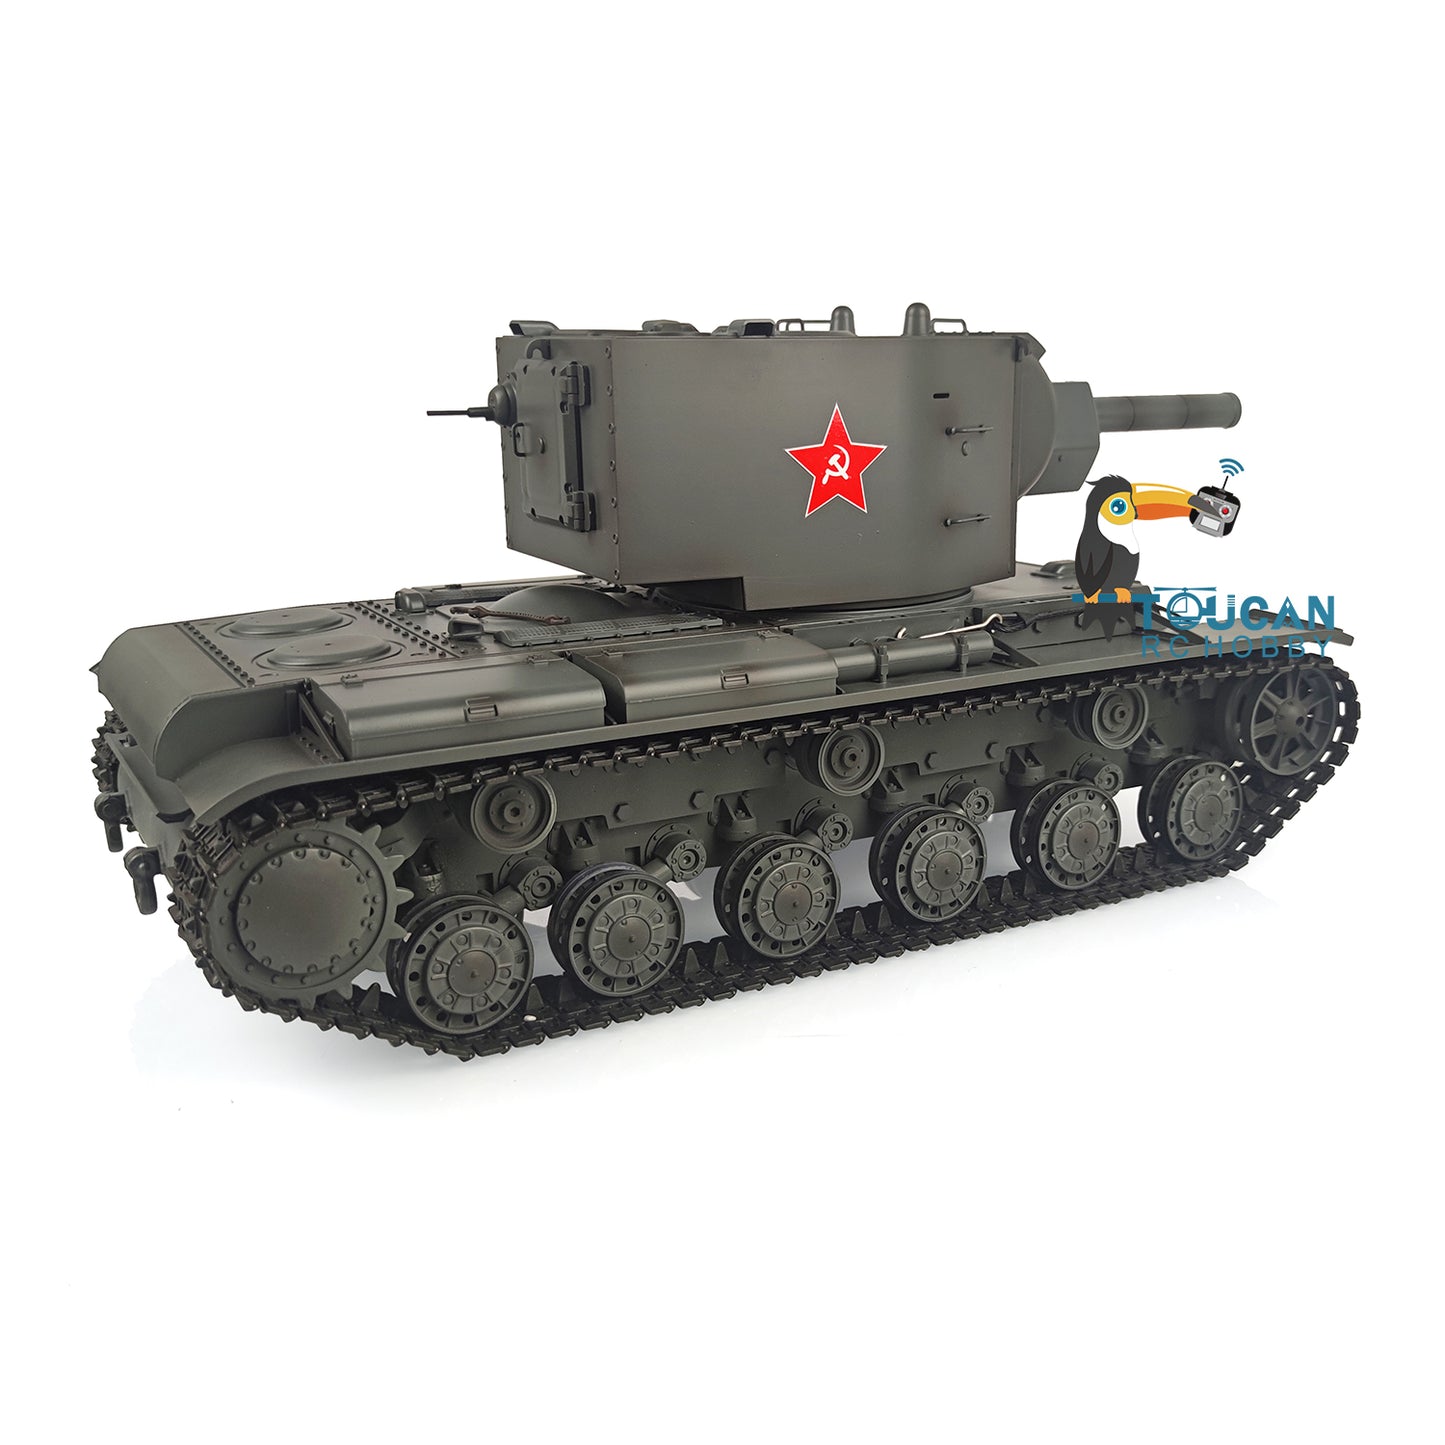 Henglong 1/16 7.0 Upgraded RC Tank Model Gigant Painted Heavy Remote Controlled Giant Military Trucks Soviet KV-2 RTR 3949 360 Turret